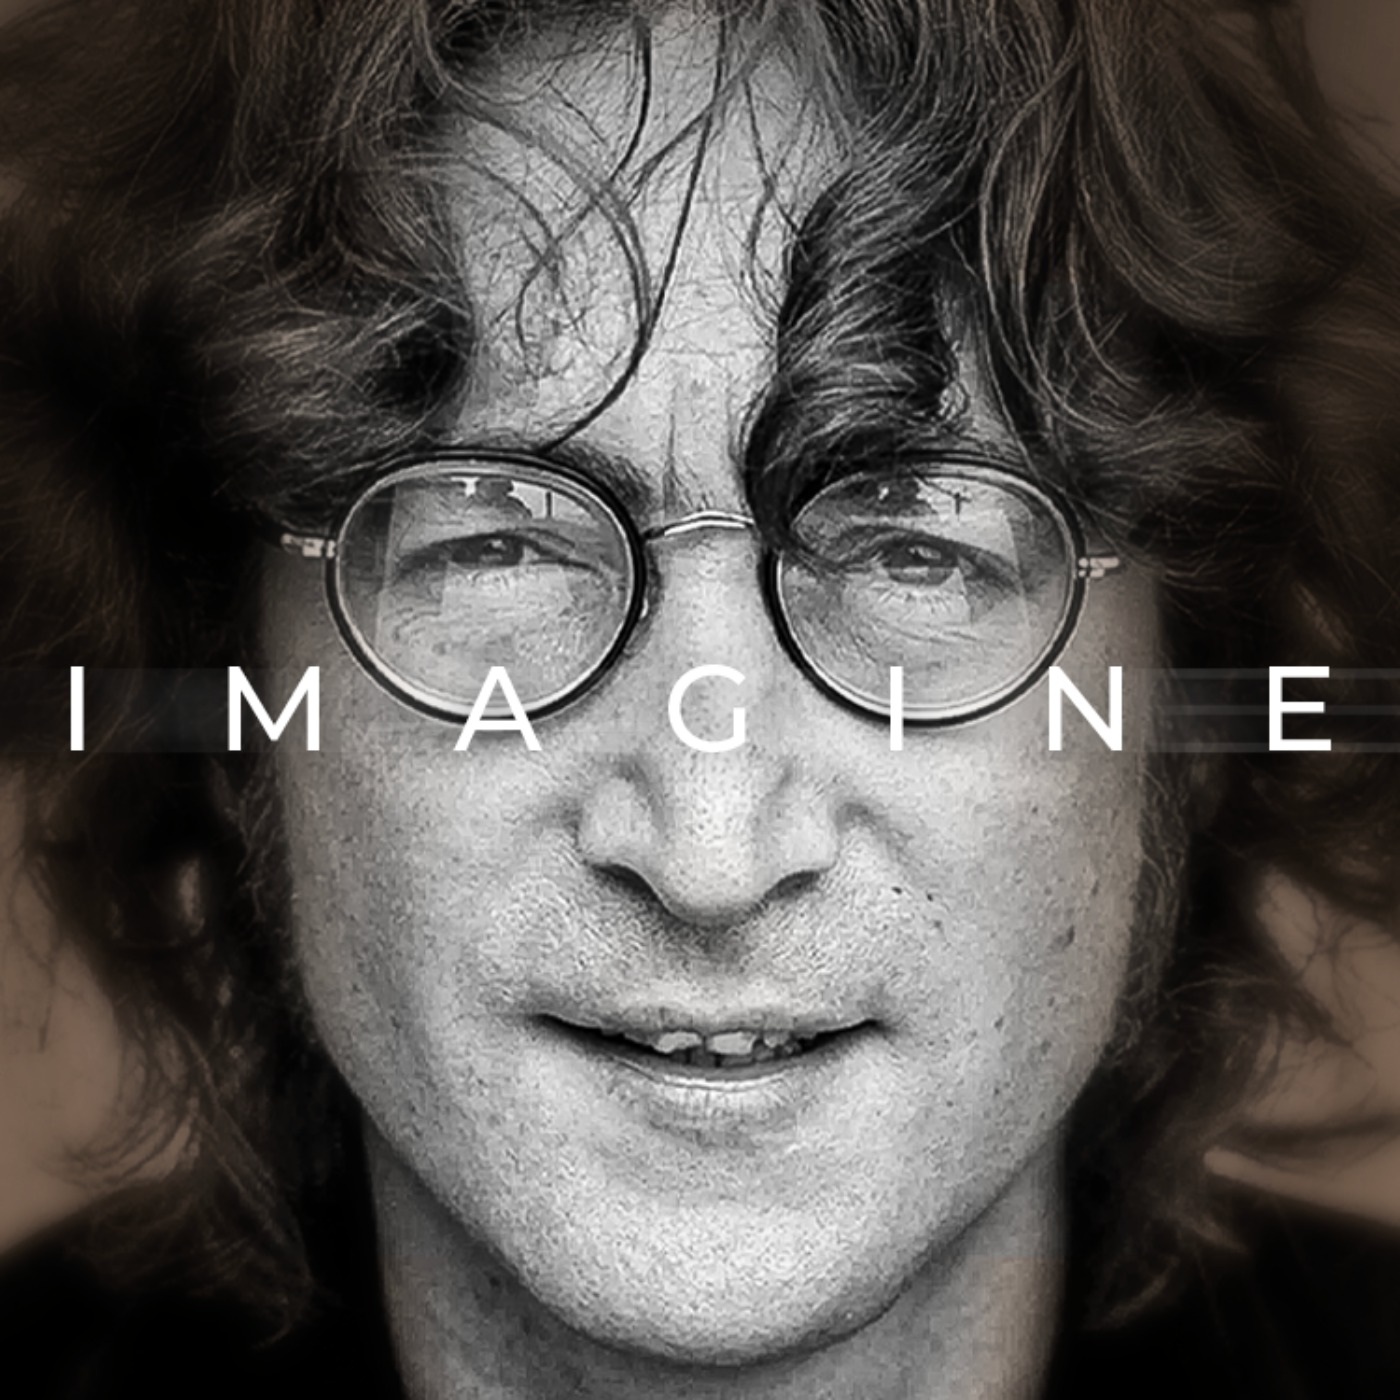 Did We See It? John Lennon's Final Message to Humanity